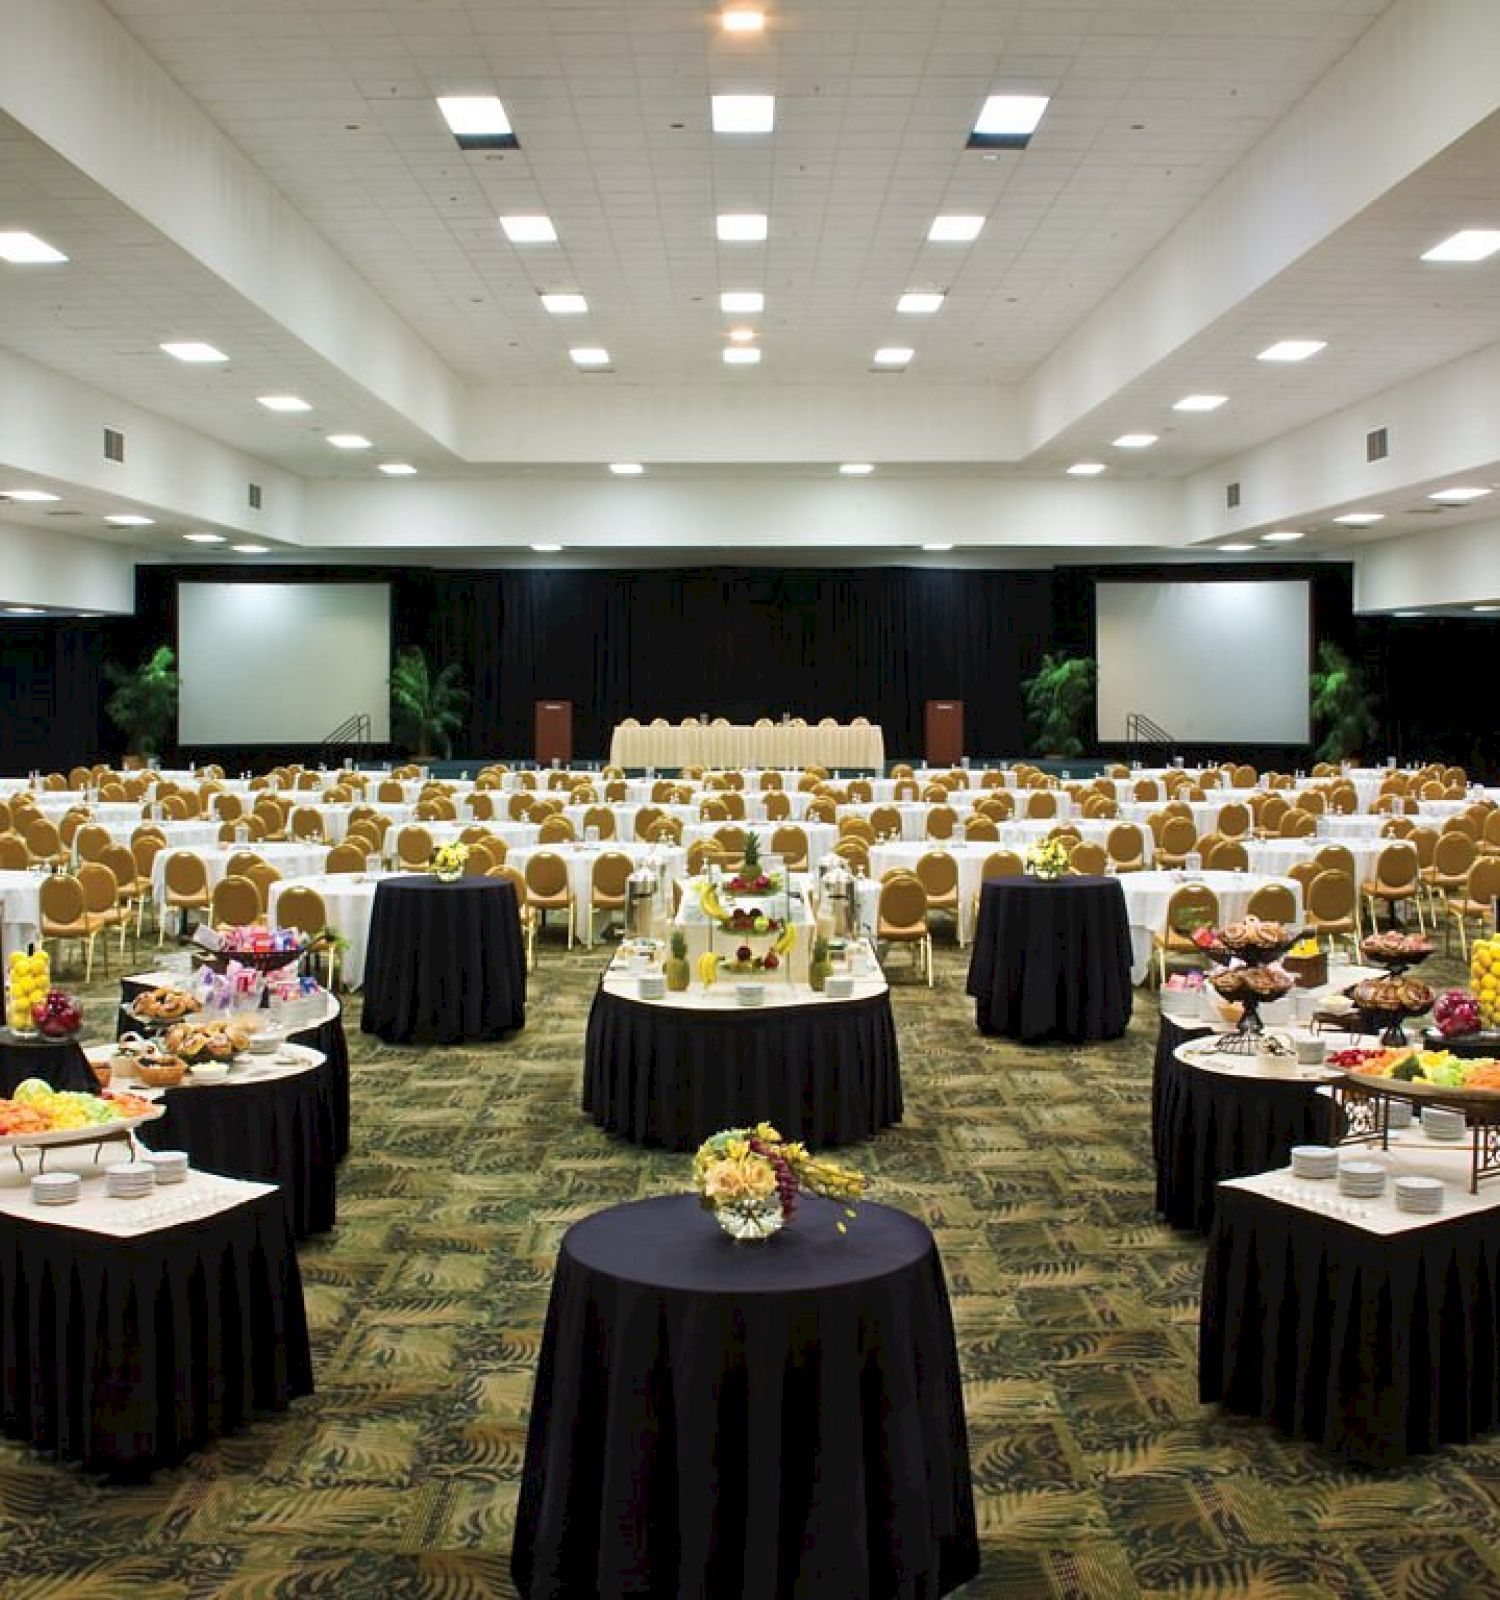 A banquet hall set up with round tables, chairs, and decorated centerpieces.